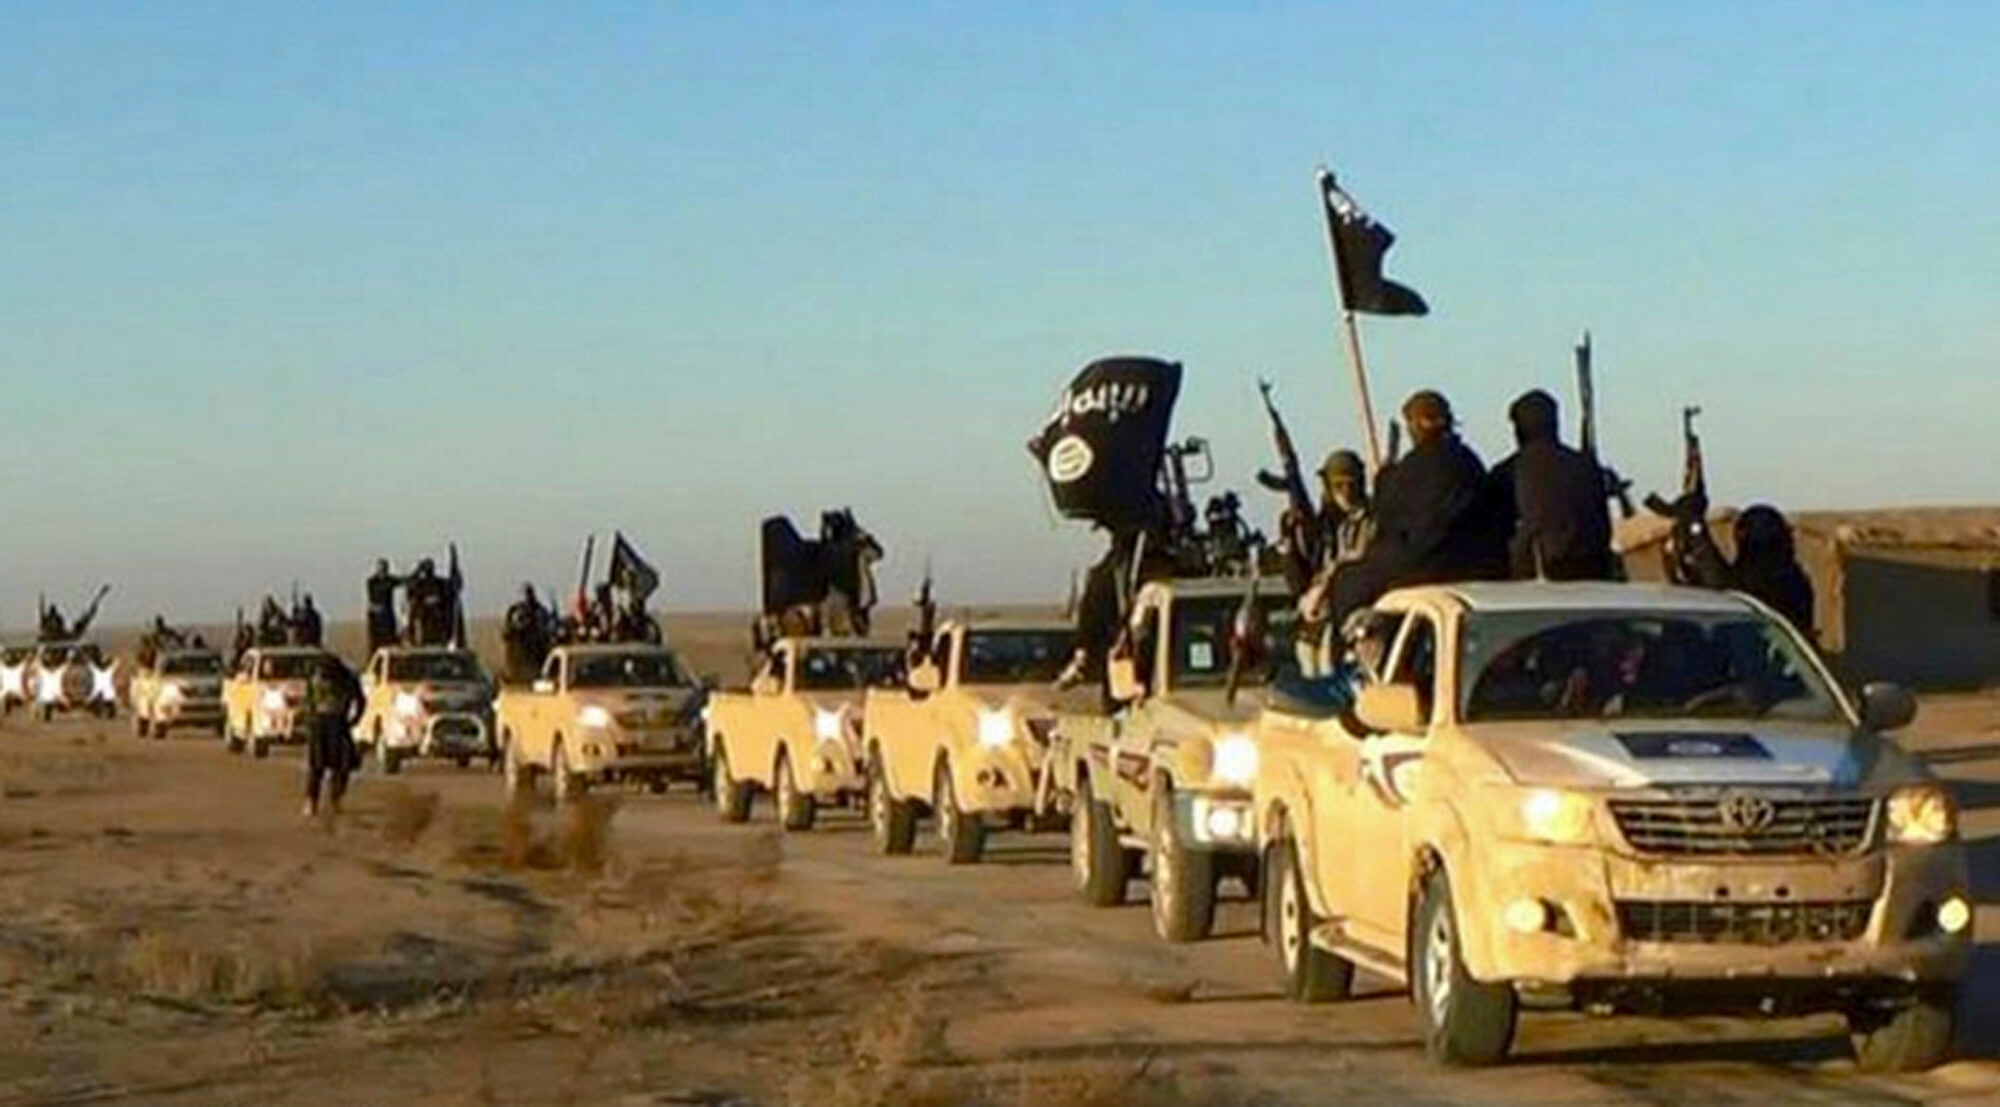 Photo of Islamic state soldiers with guns, flags, vehicles